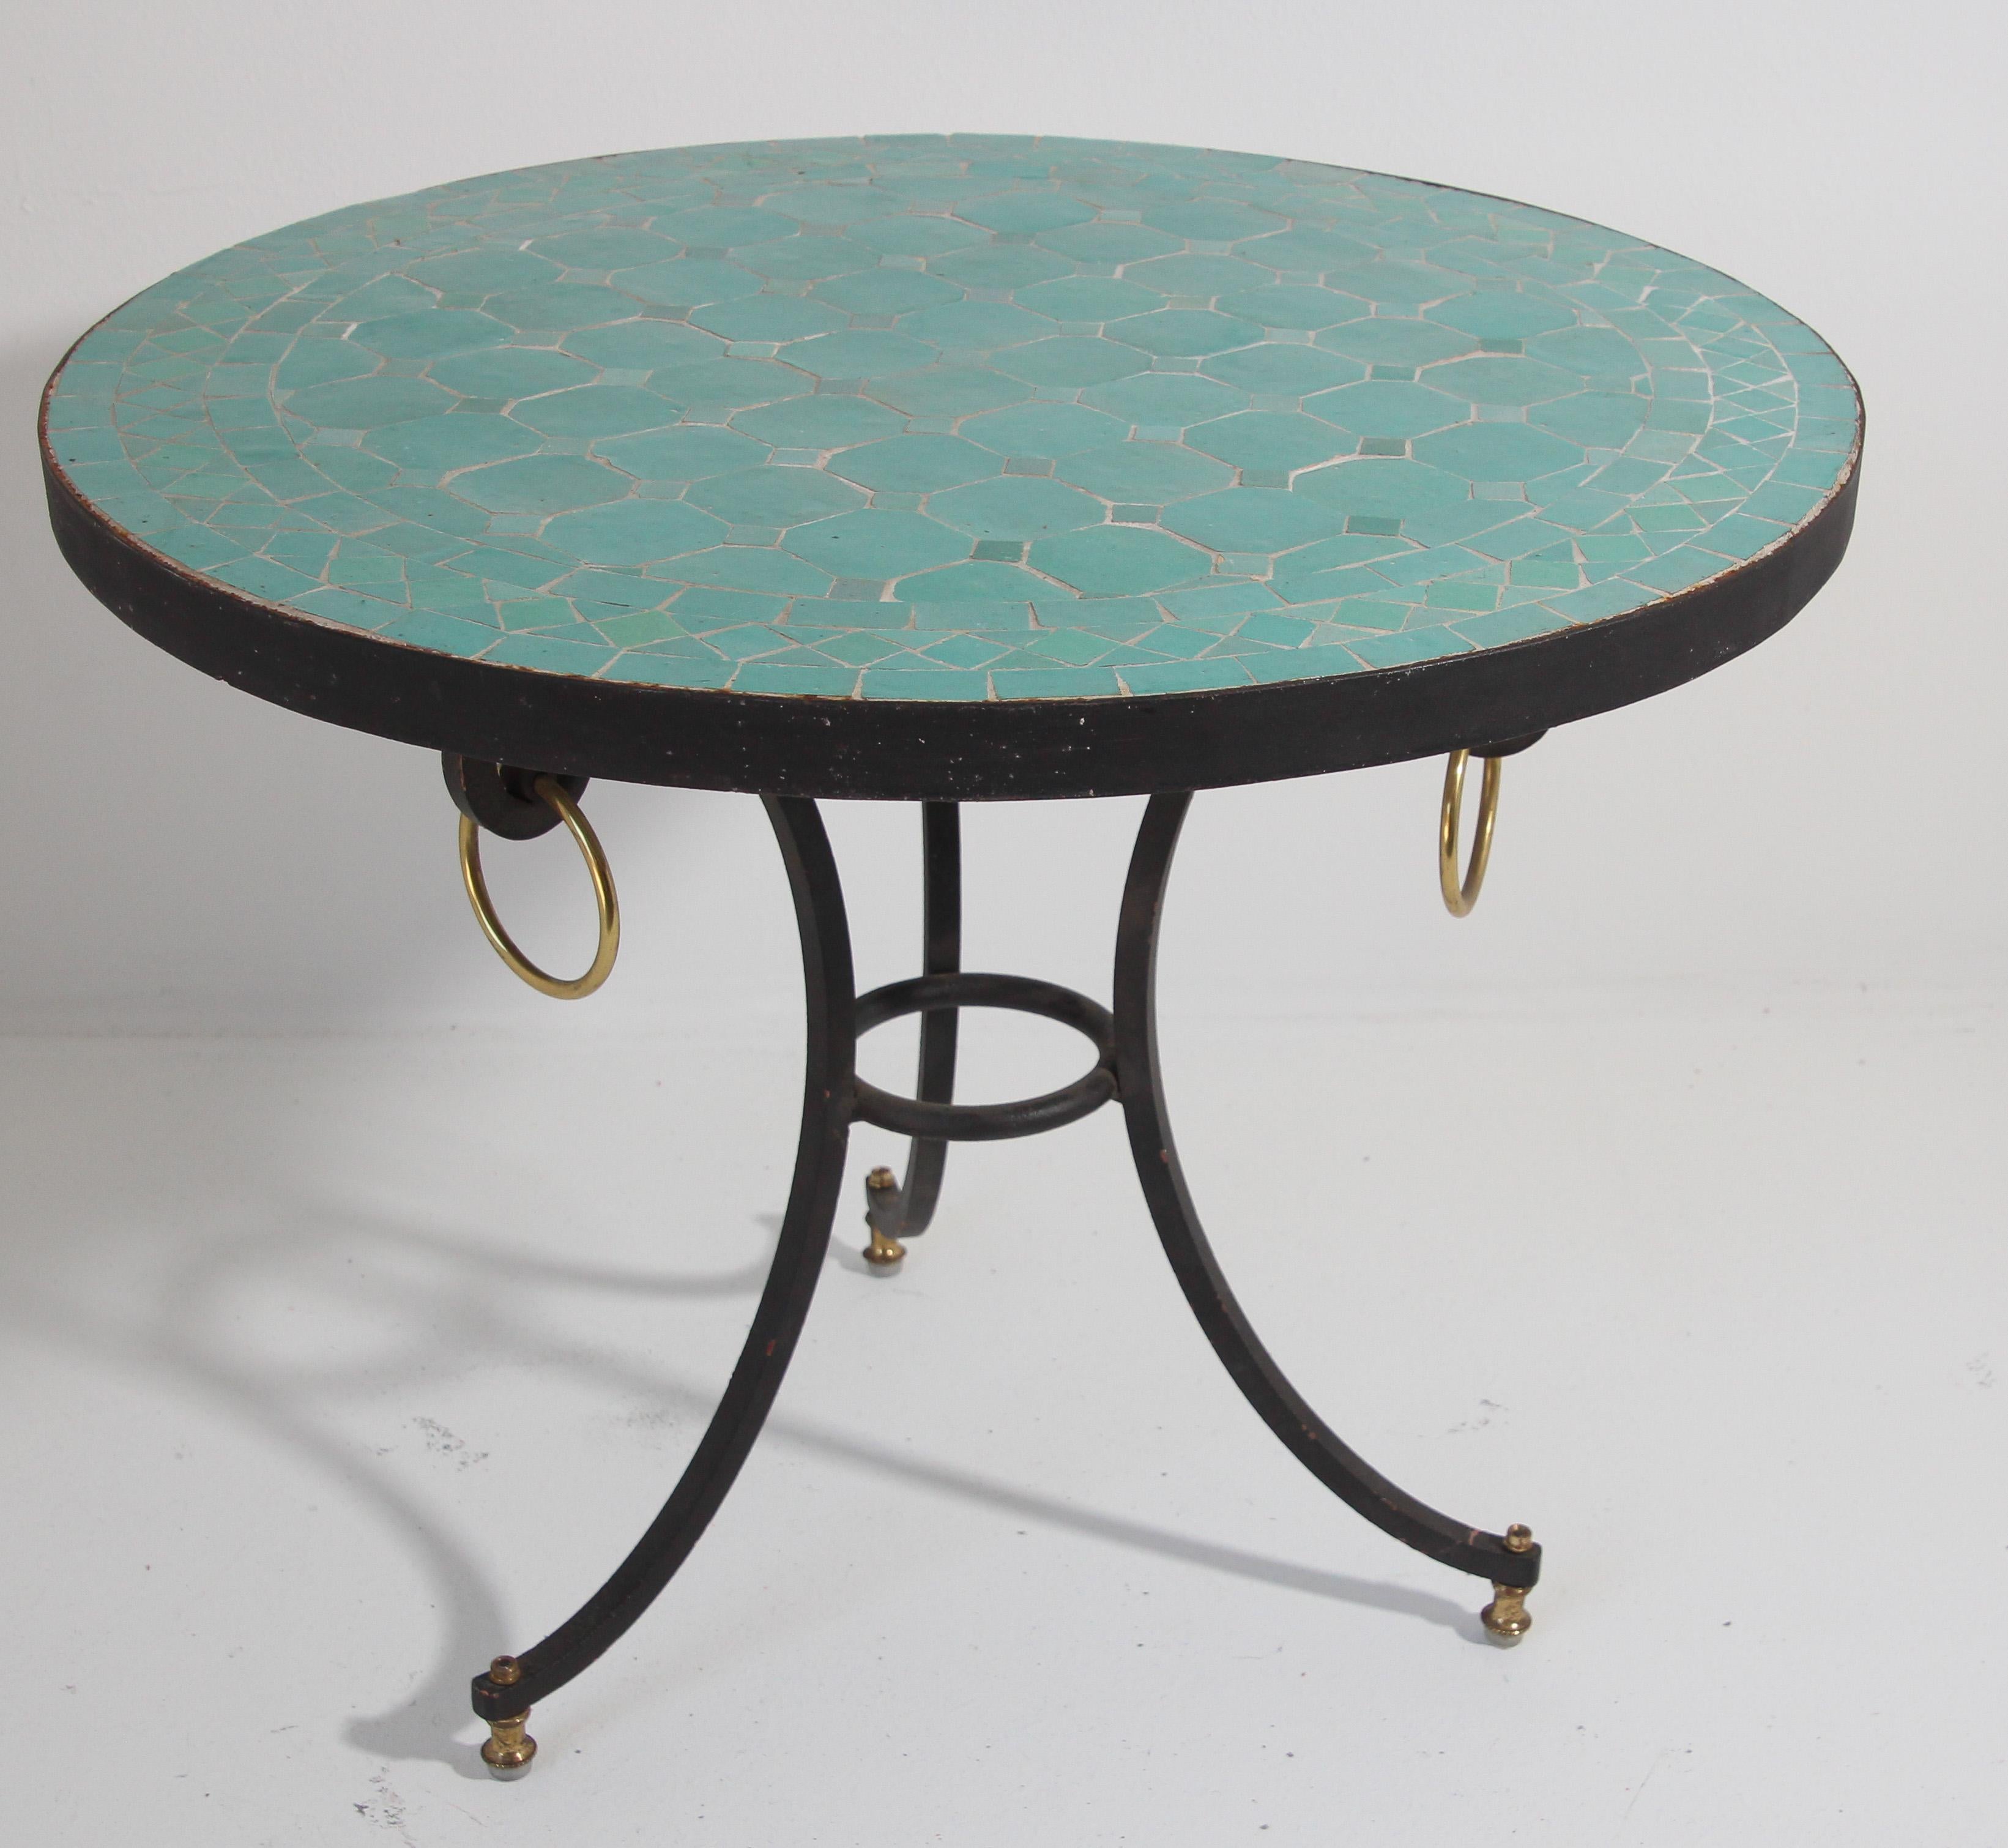 Moroccan mosaic tiles side patio table on iron base.
Handmade by expert artisans in Fez, Morocco using reclaimed old glazed teal color tiles inlaid in concrete using reclaimed old glazed tiles and making beautiful geometrical designs, colors are